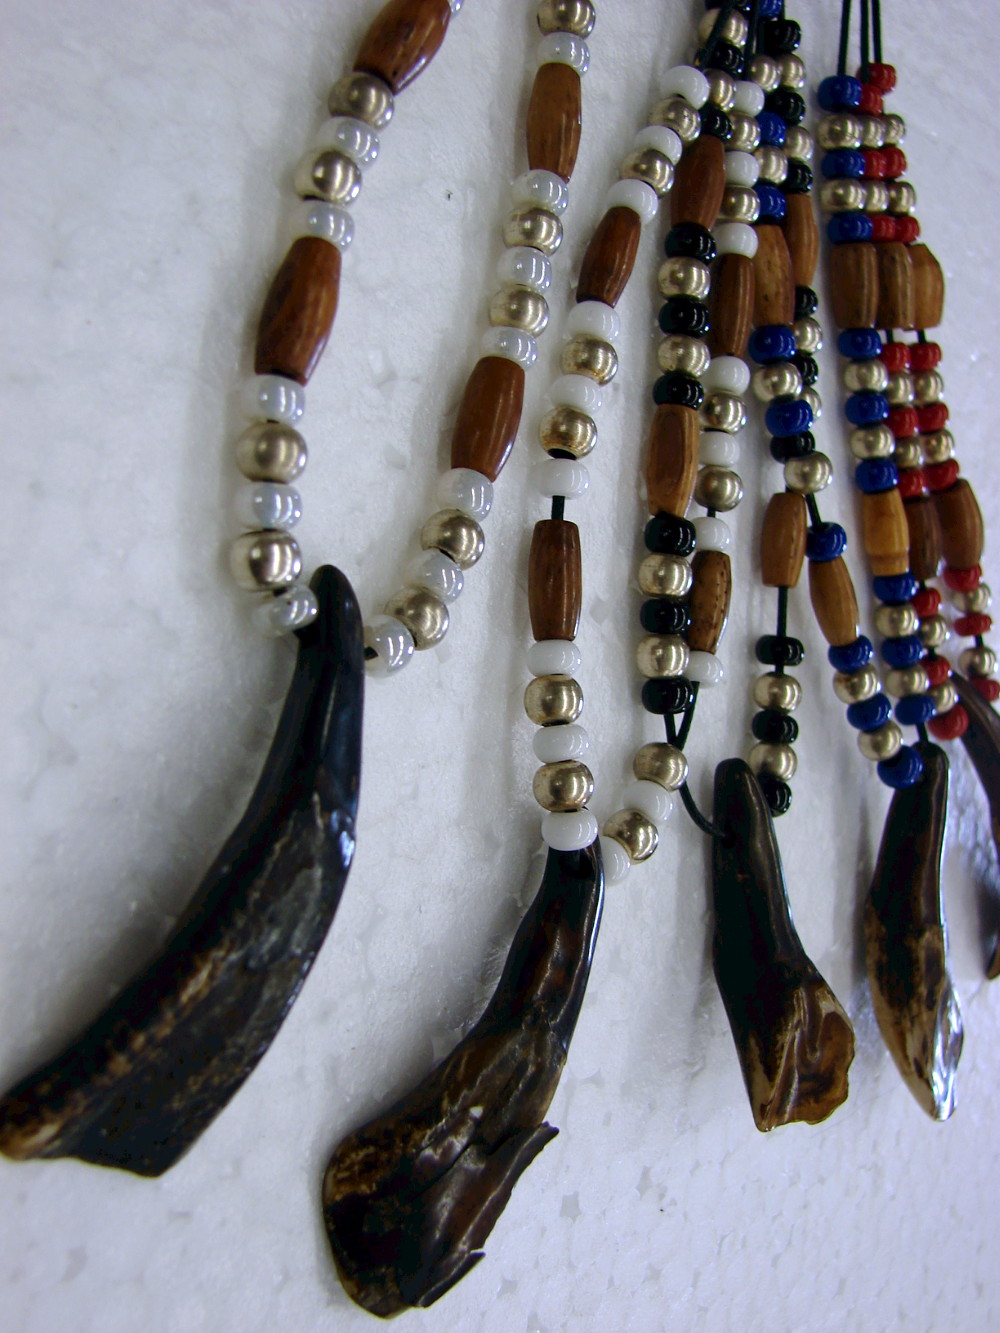 Native American Jewellery – Two Feathers Brighton